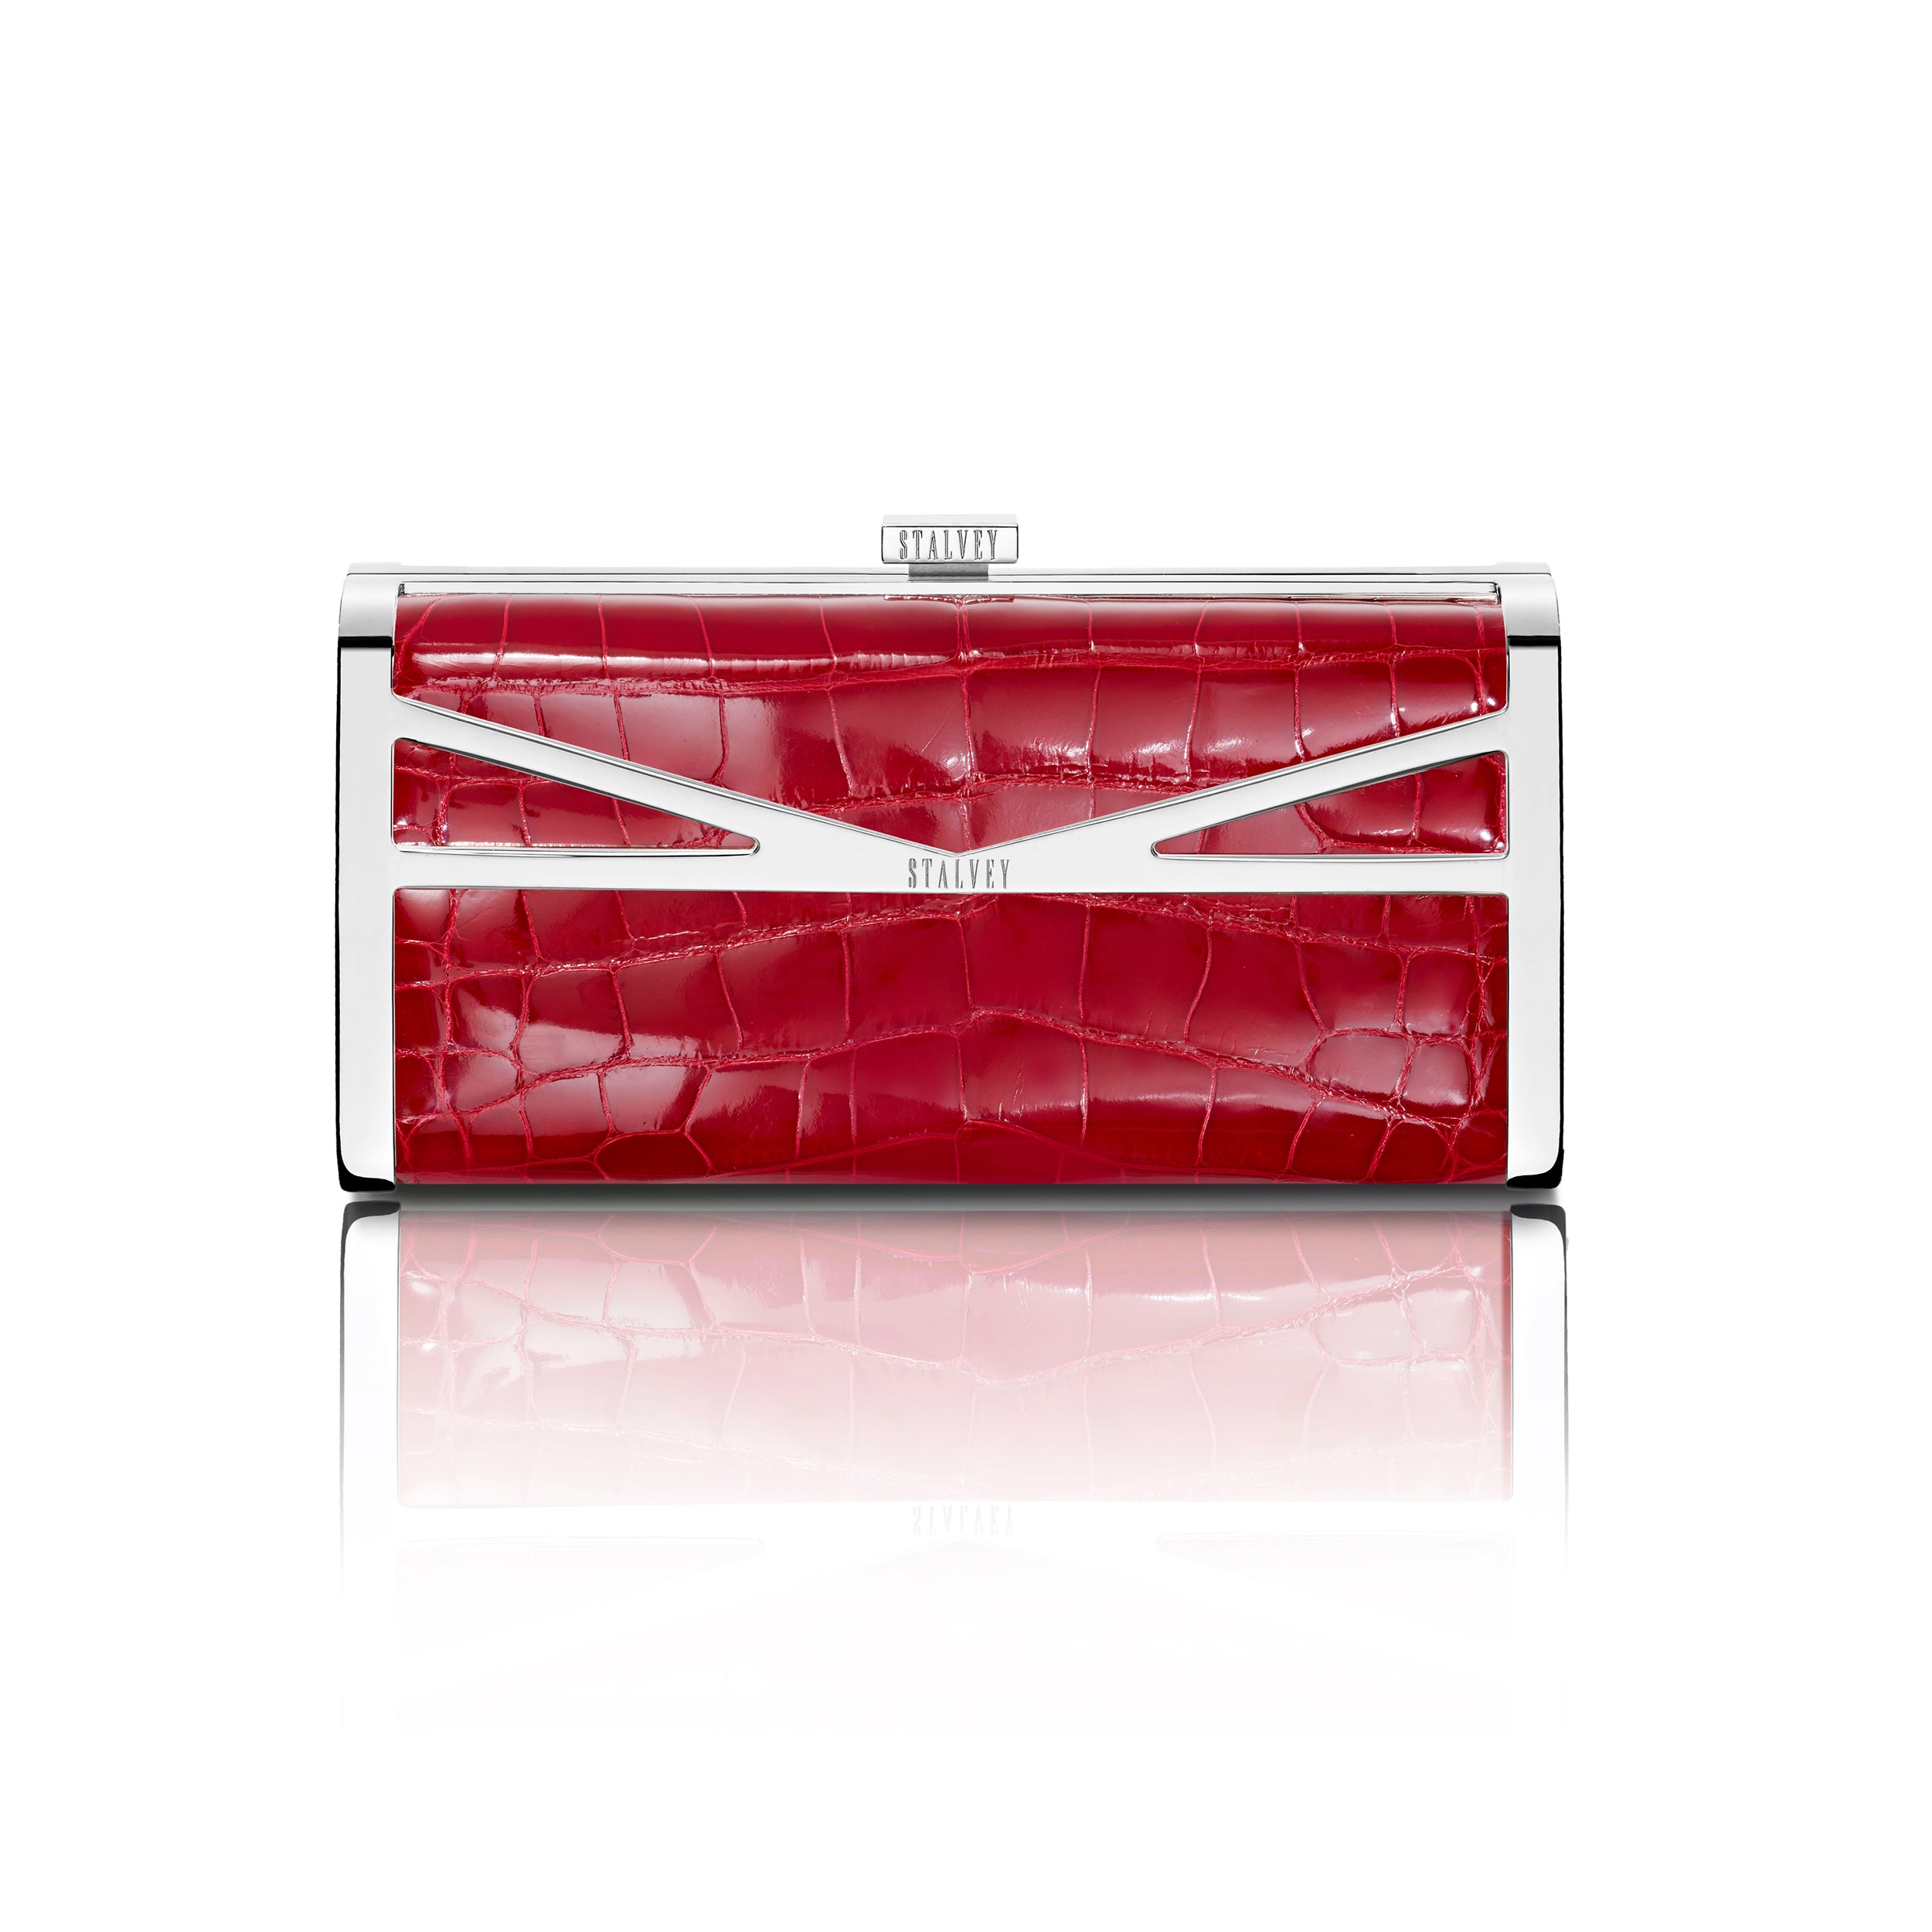 STALVEY Square Clutch in Red Alligator with Palladium Hardware Front View